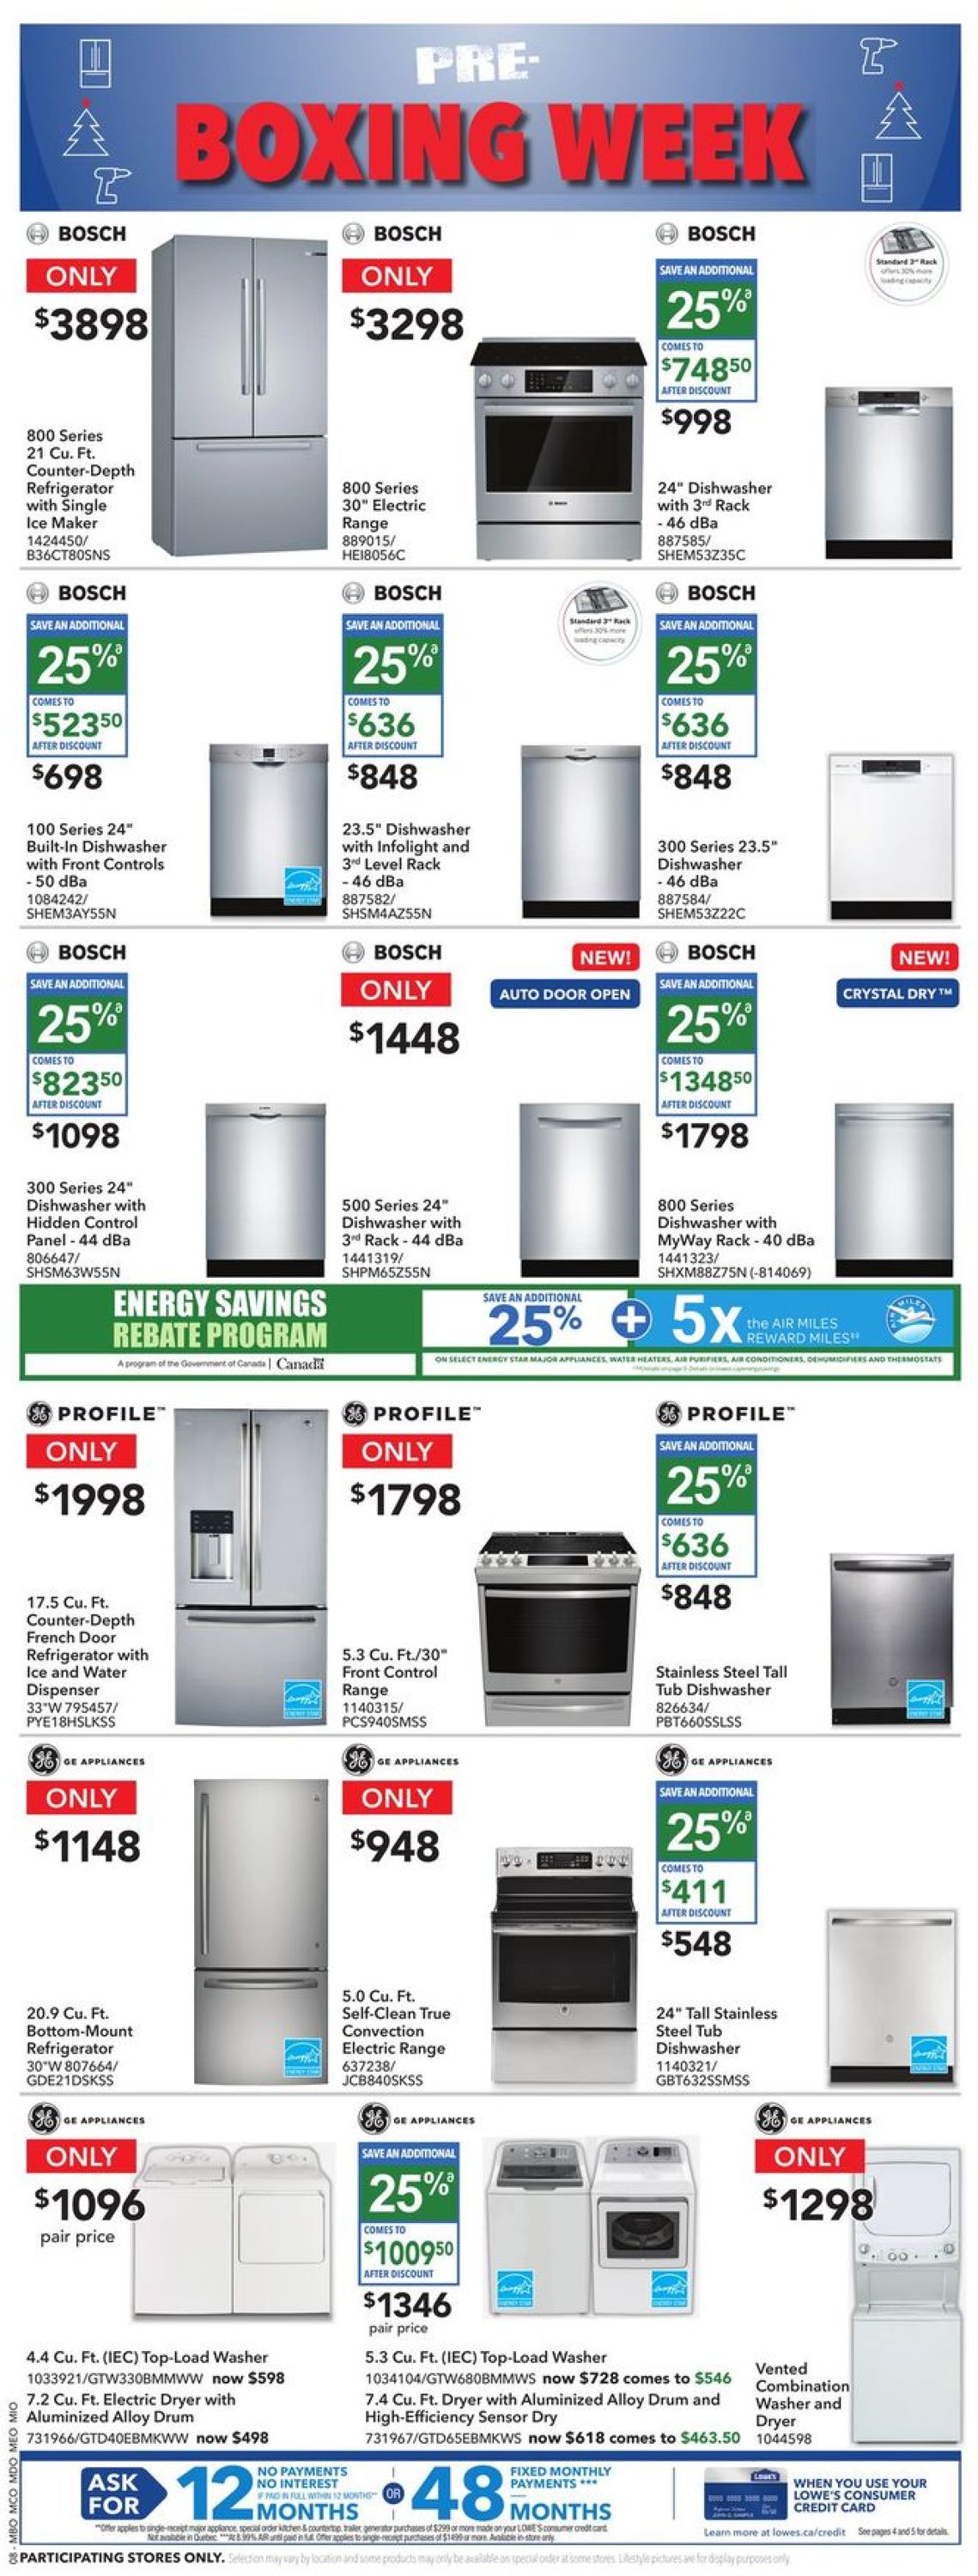 Lowes - PRE-BOXING WEEK 2019 SALE Flyer - 12/19-12/25/2019 (Page 11)